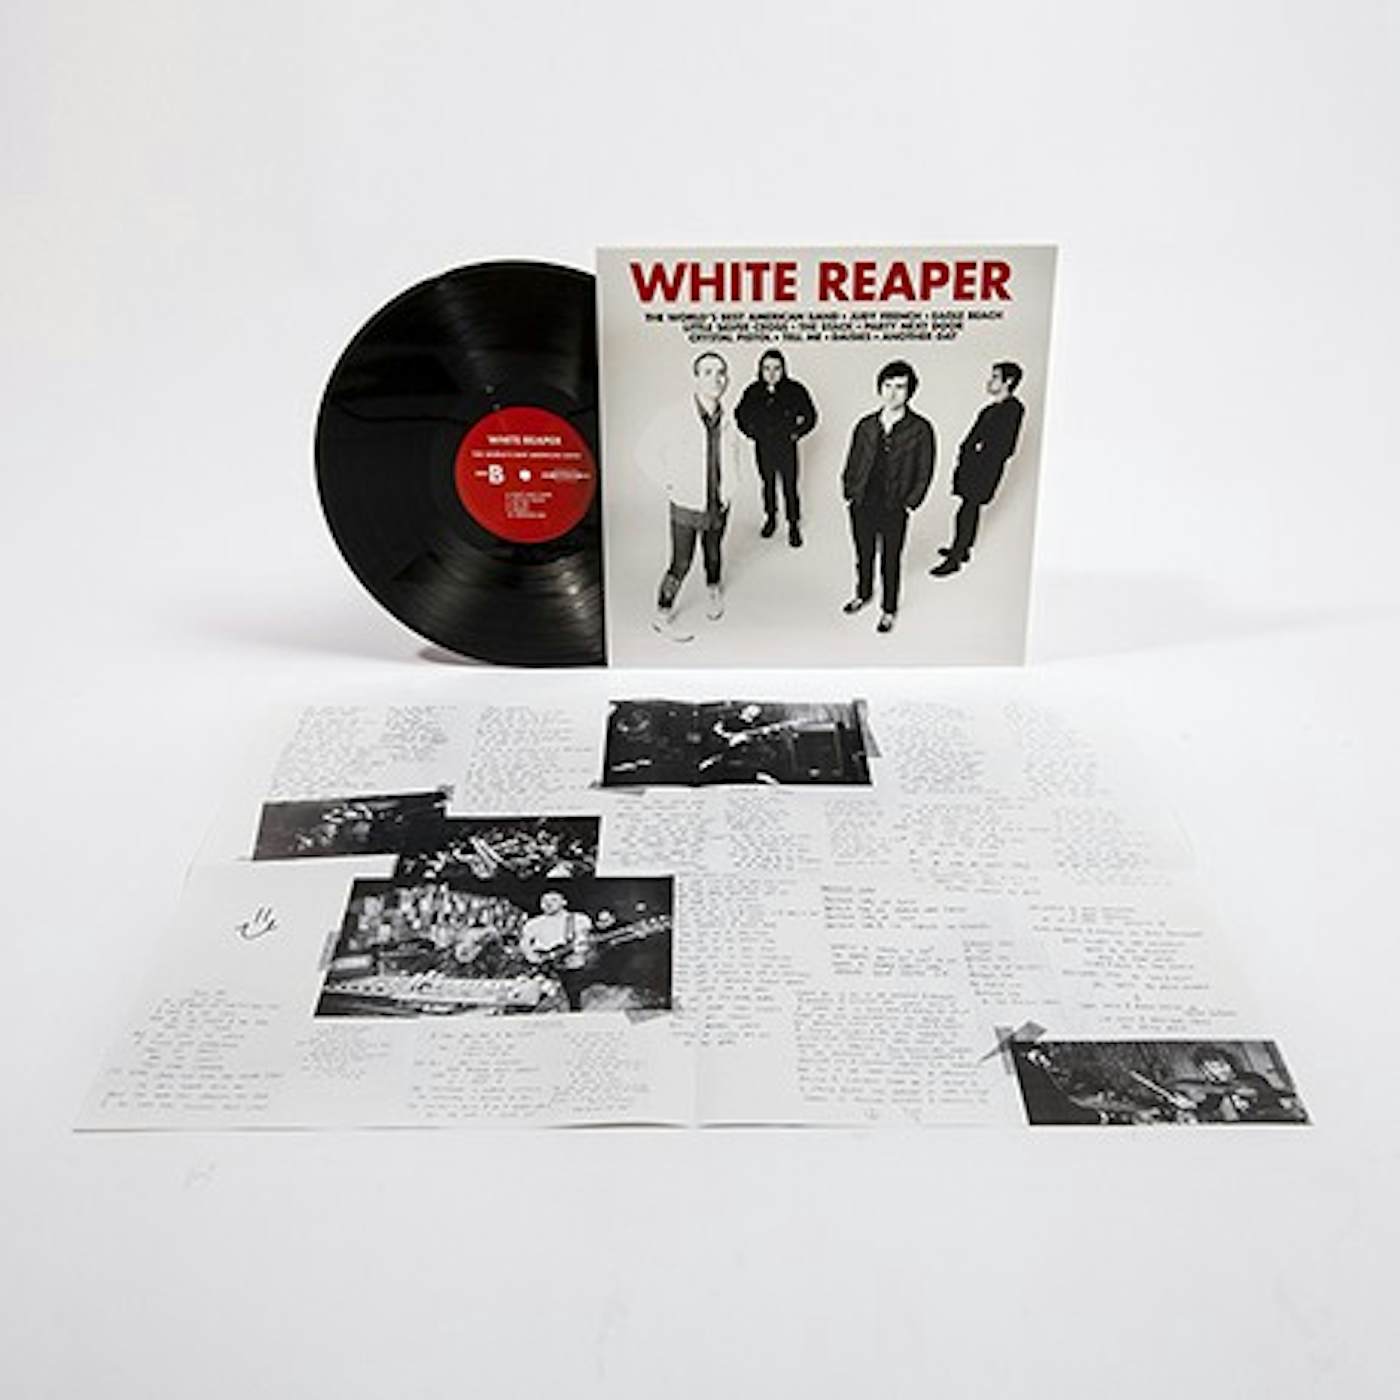 WHITE REAPER: Tony Esposito on the World's Best American Band – STATIKNOIZE